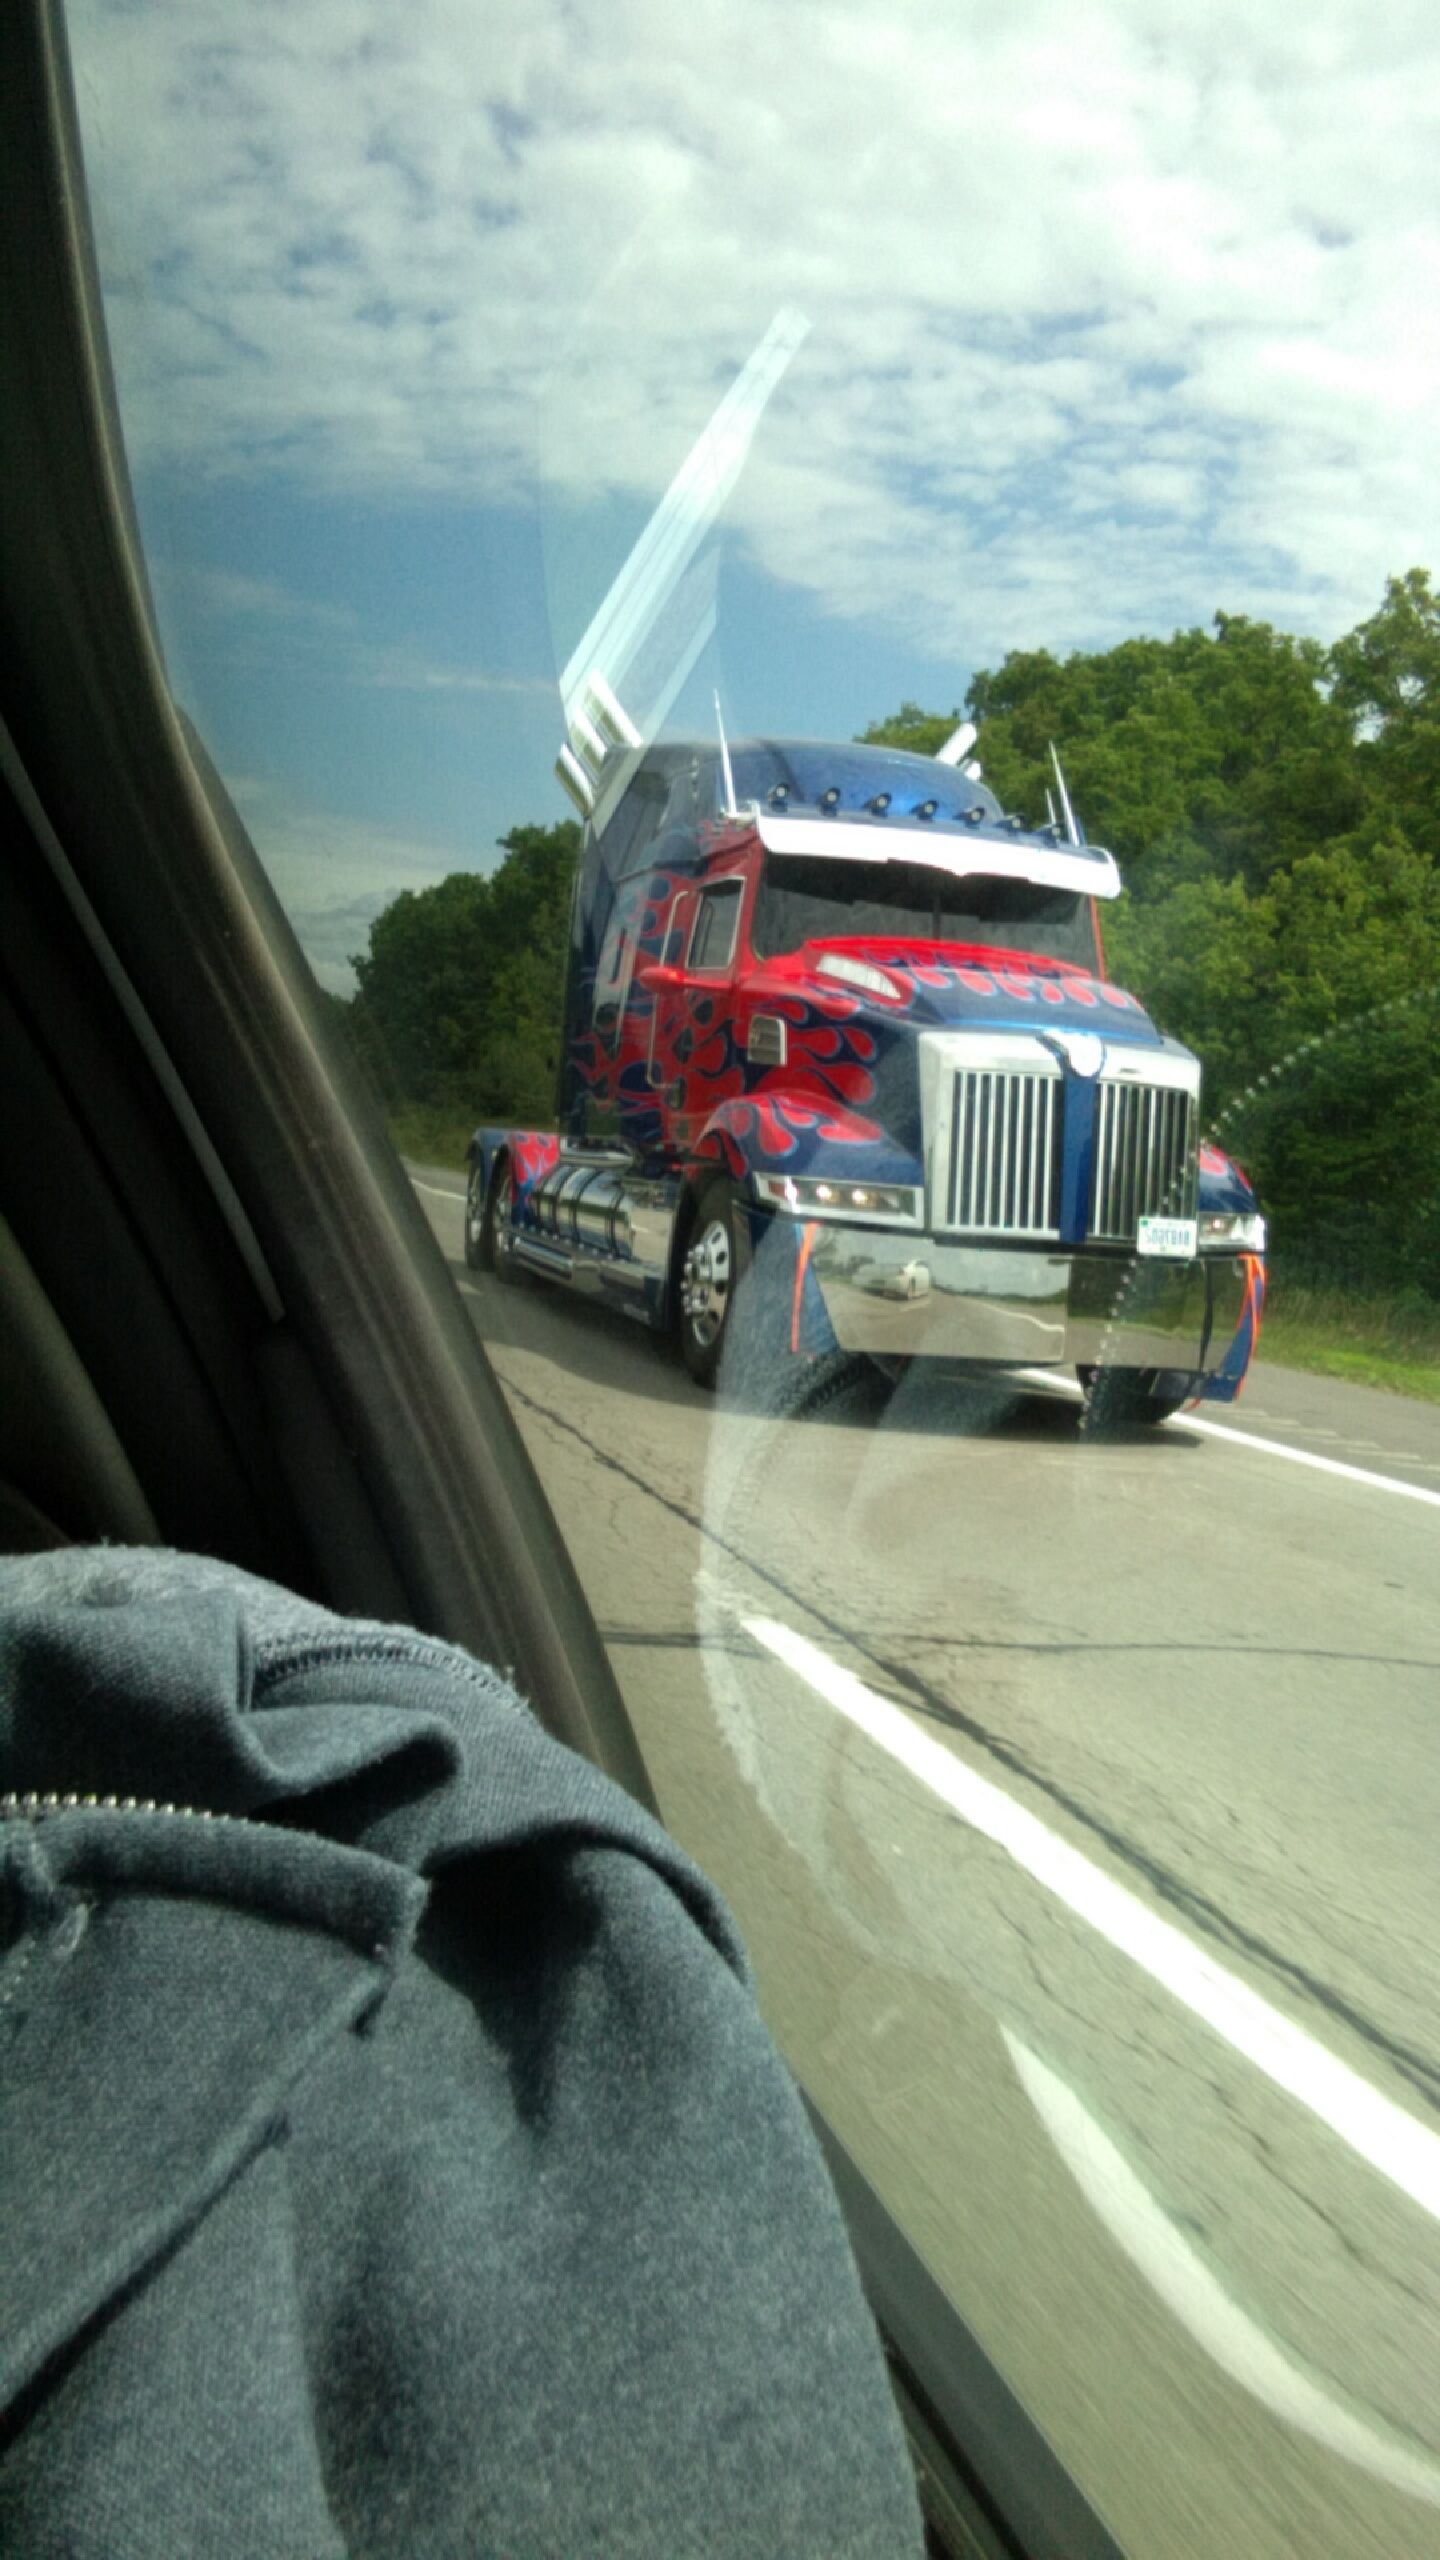 1440x2560 Transformers 5 is filming in my city. I passed Optimus Prime on the highway. &acirc;&#128;&cent; /r/pics | Transformers cars, Transformers, Transformers autobots